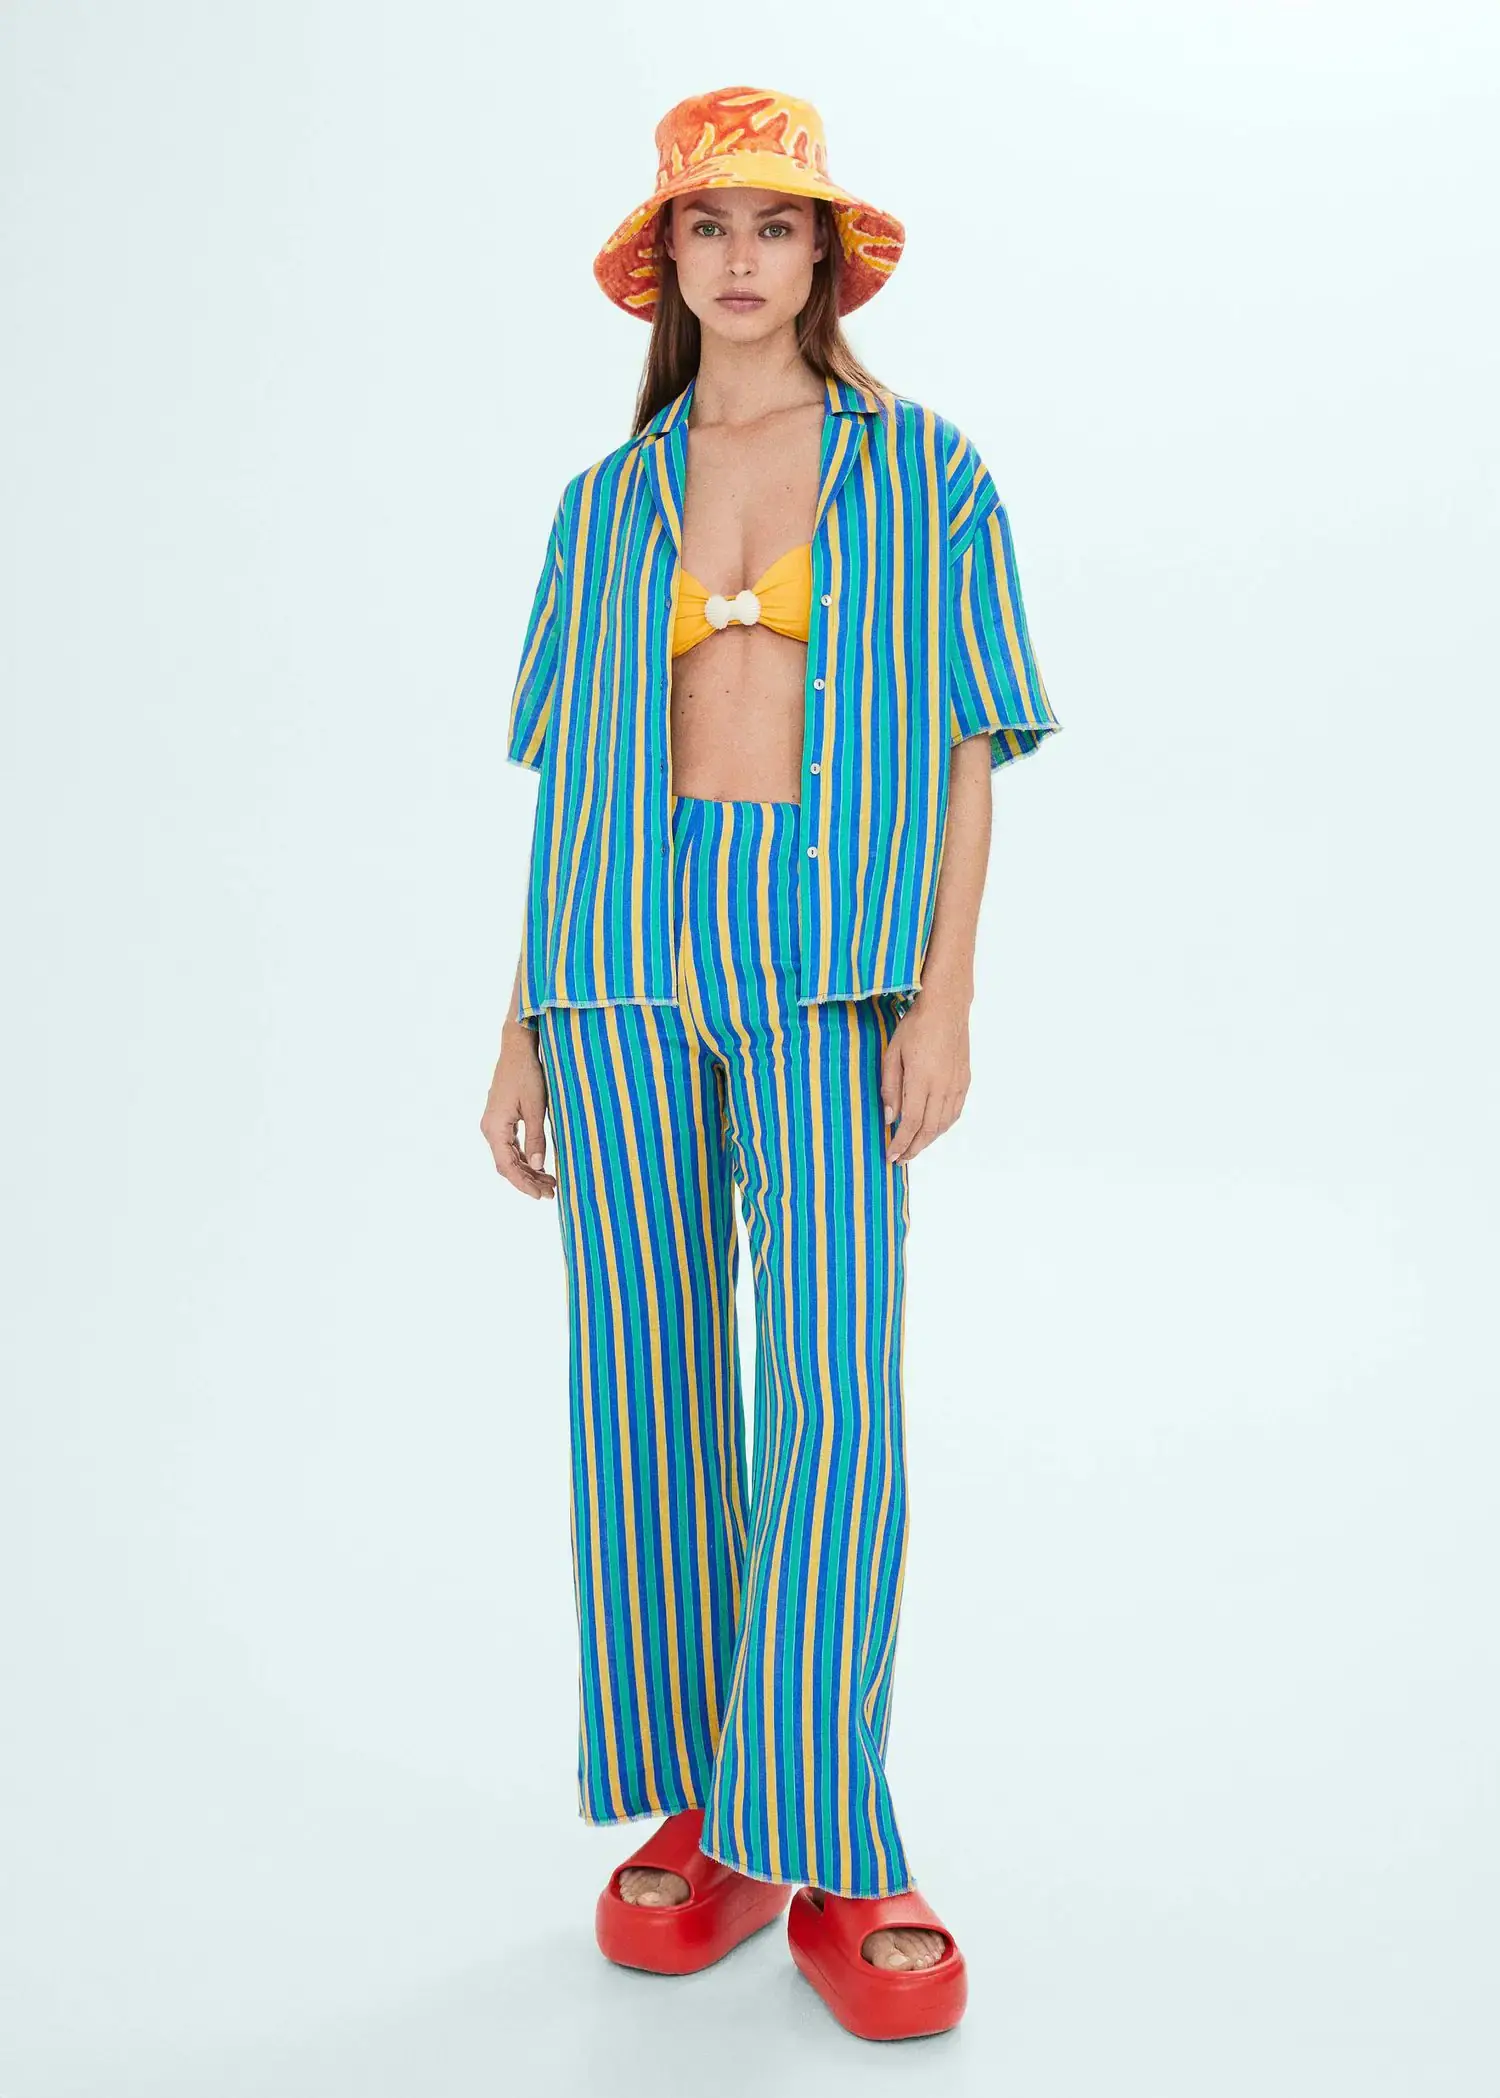 Mango Multi-colored striped linen shirt. a woman in a blue and white striped outfit. 